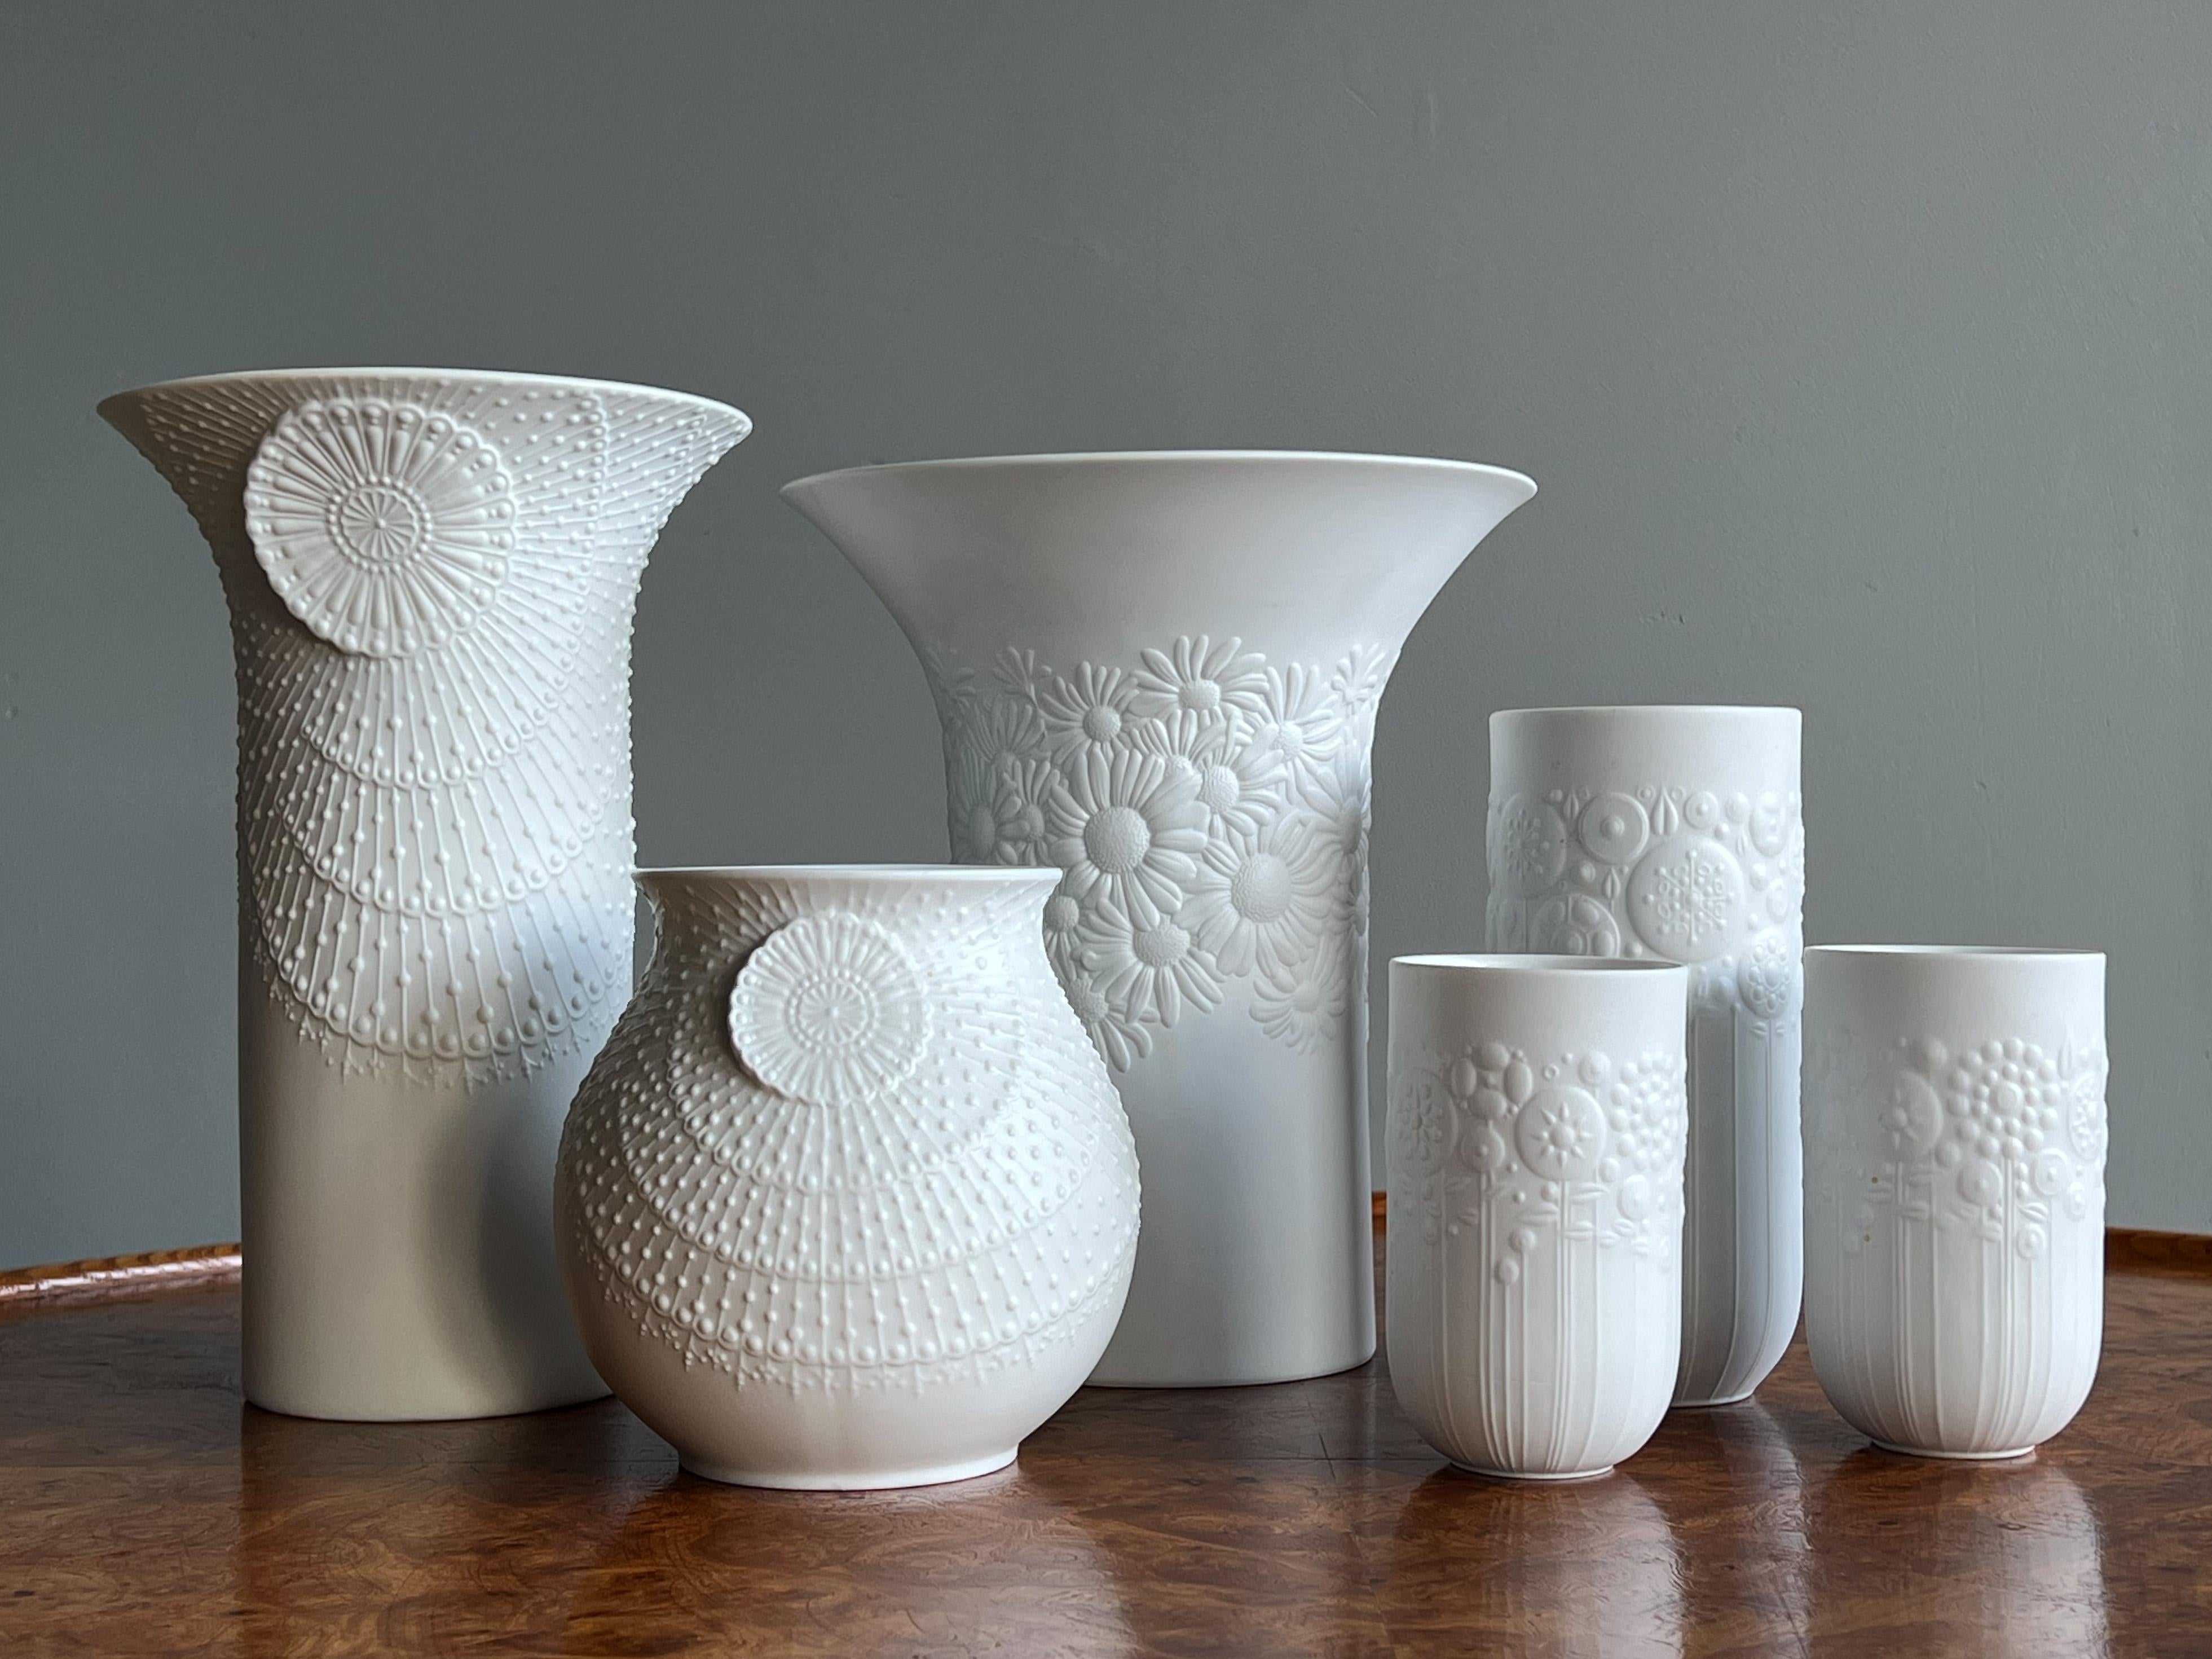 A lovely grouping of porcelain bisque vases for Kaiser Germany and Rosenthal “Studio Line” c.1970s. The decorative forms looked so good as a whole, we decided to offer them together. 

The taller vase on far left and the smaller directly under are